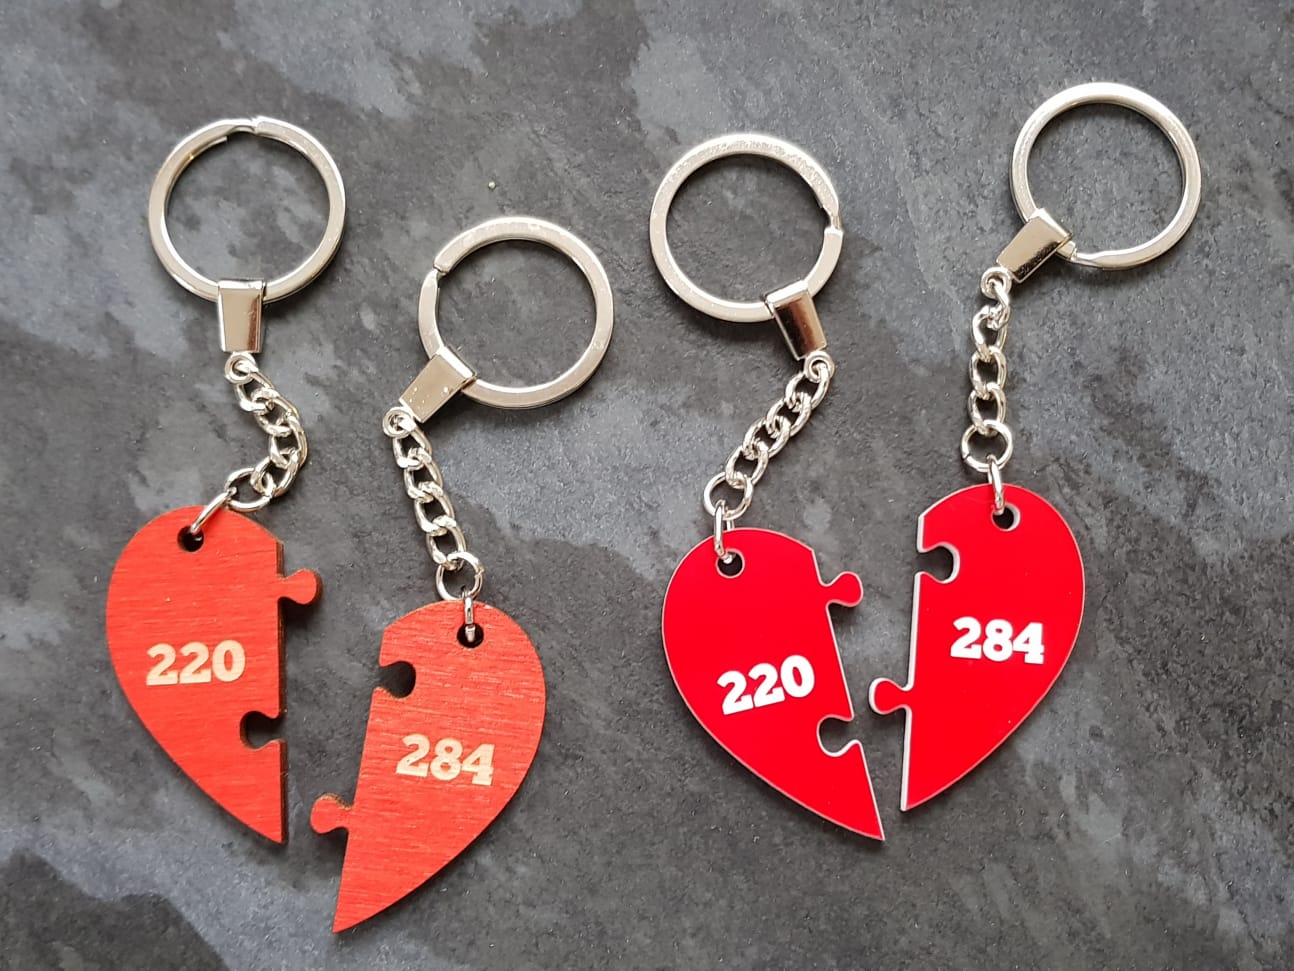 Amicable Numbers Pair Of Keyrings Maths Gear Mathematical Curiosities Games And Gifts